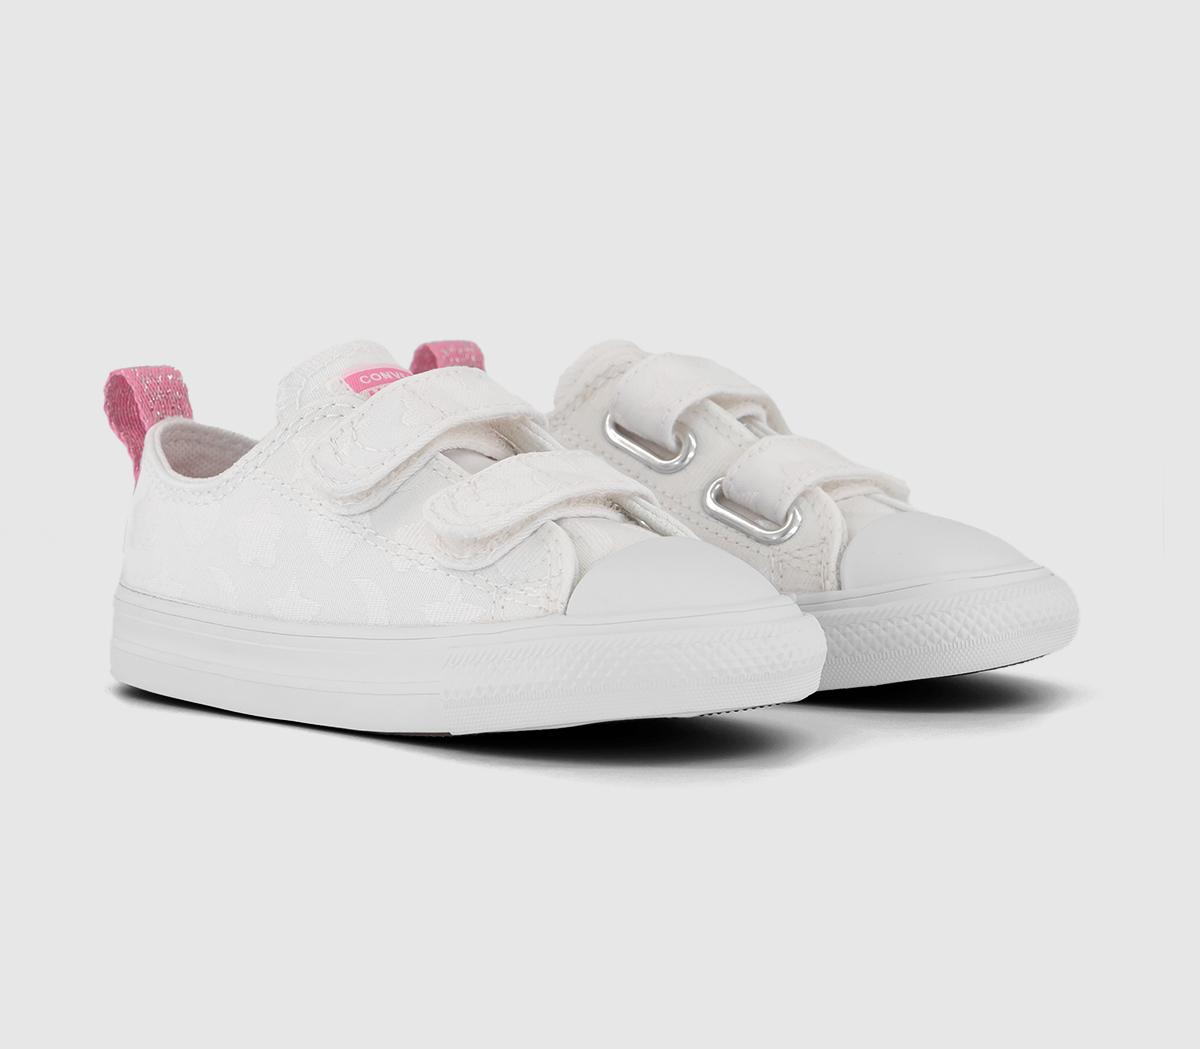 Converse Kids All Star 2vlace Trainers White Oops Pink, 7infant